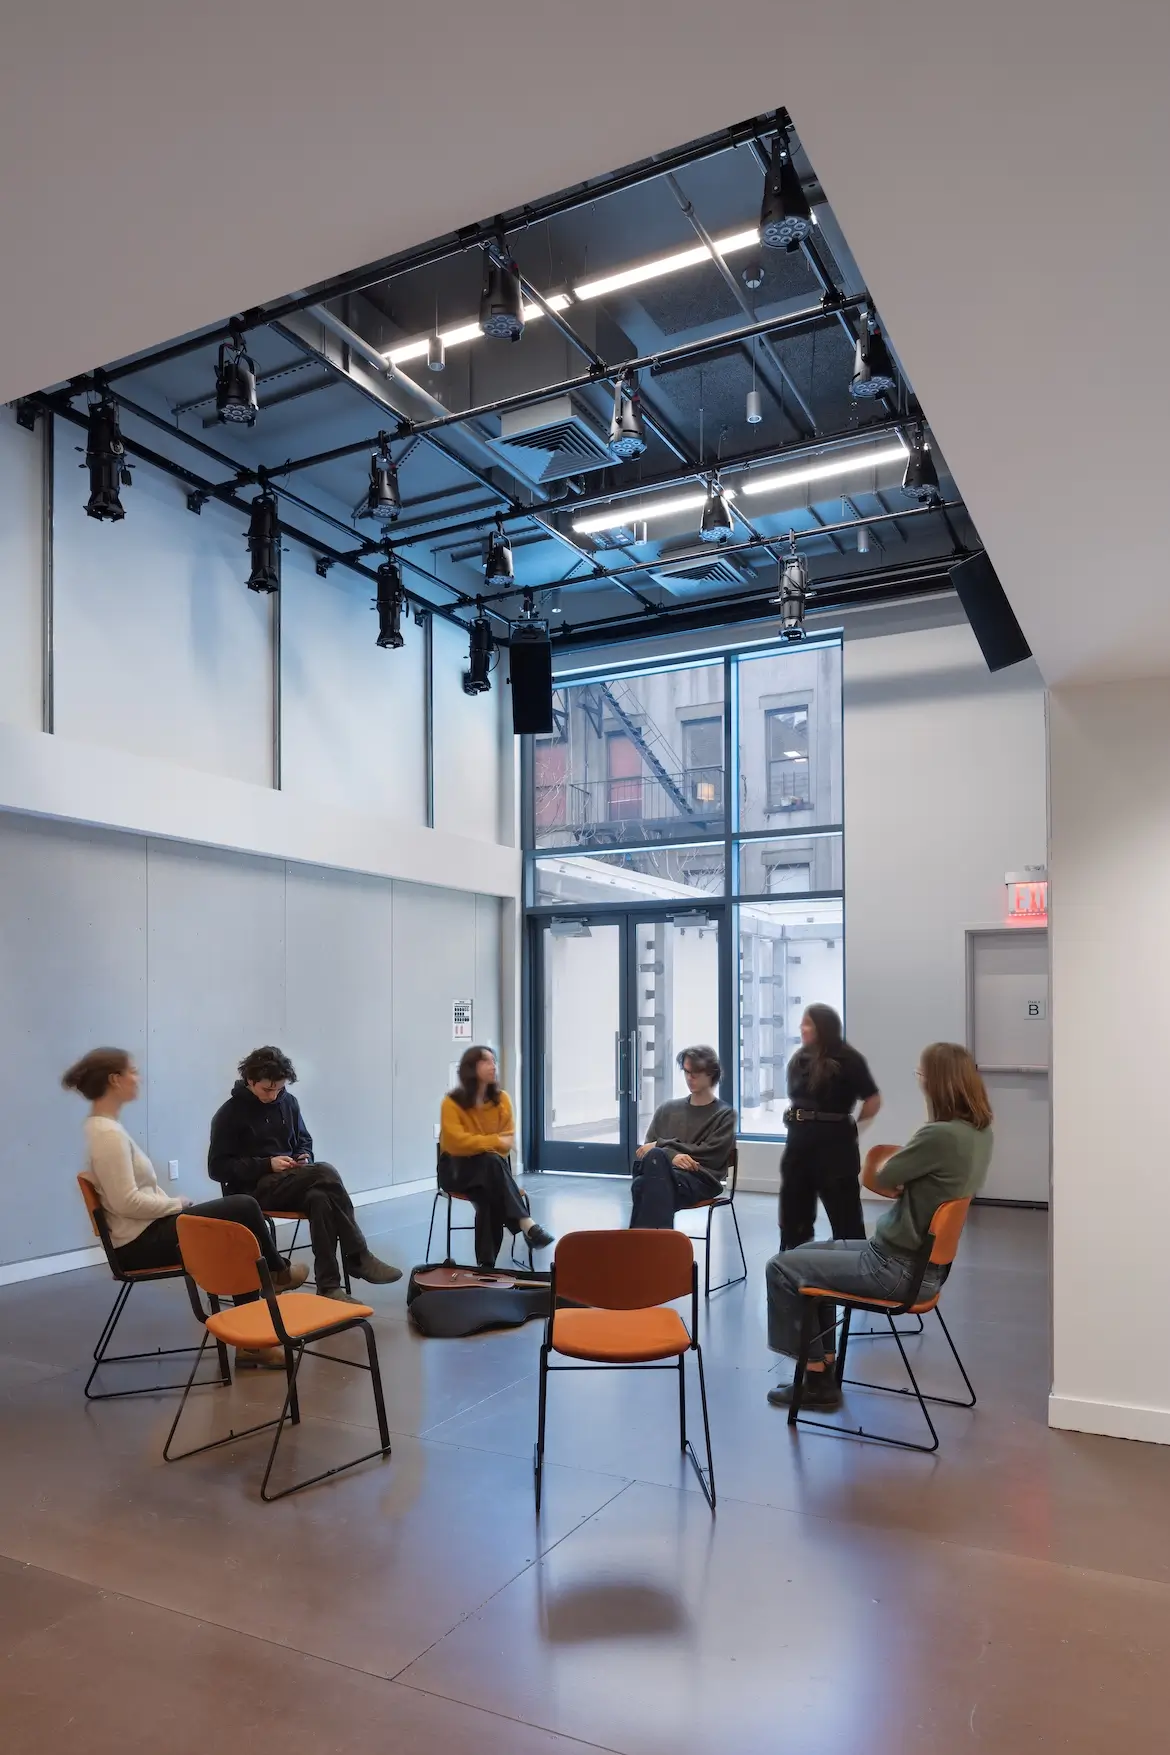 people gathering in chairs in a studio space.